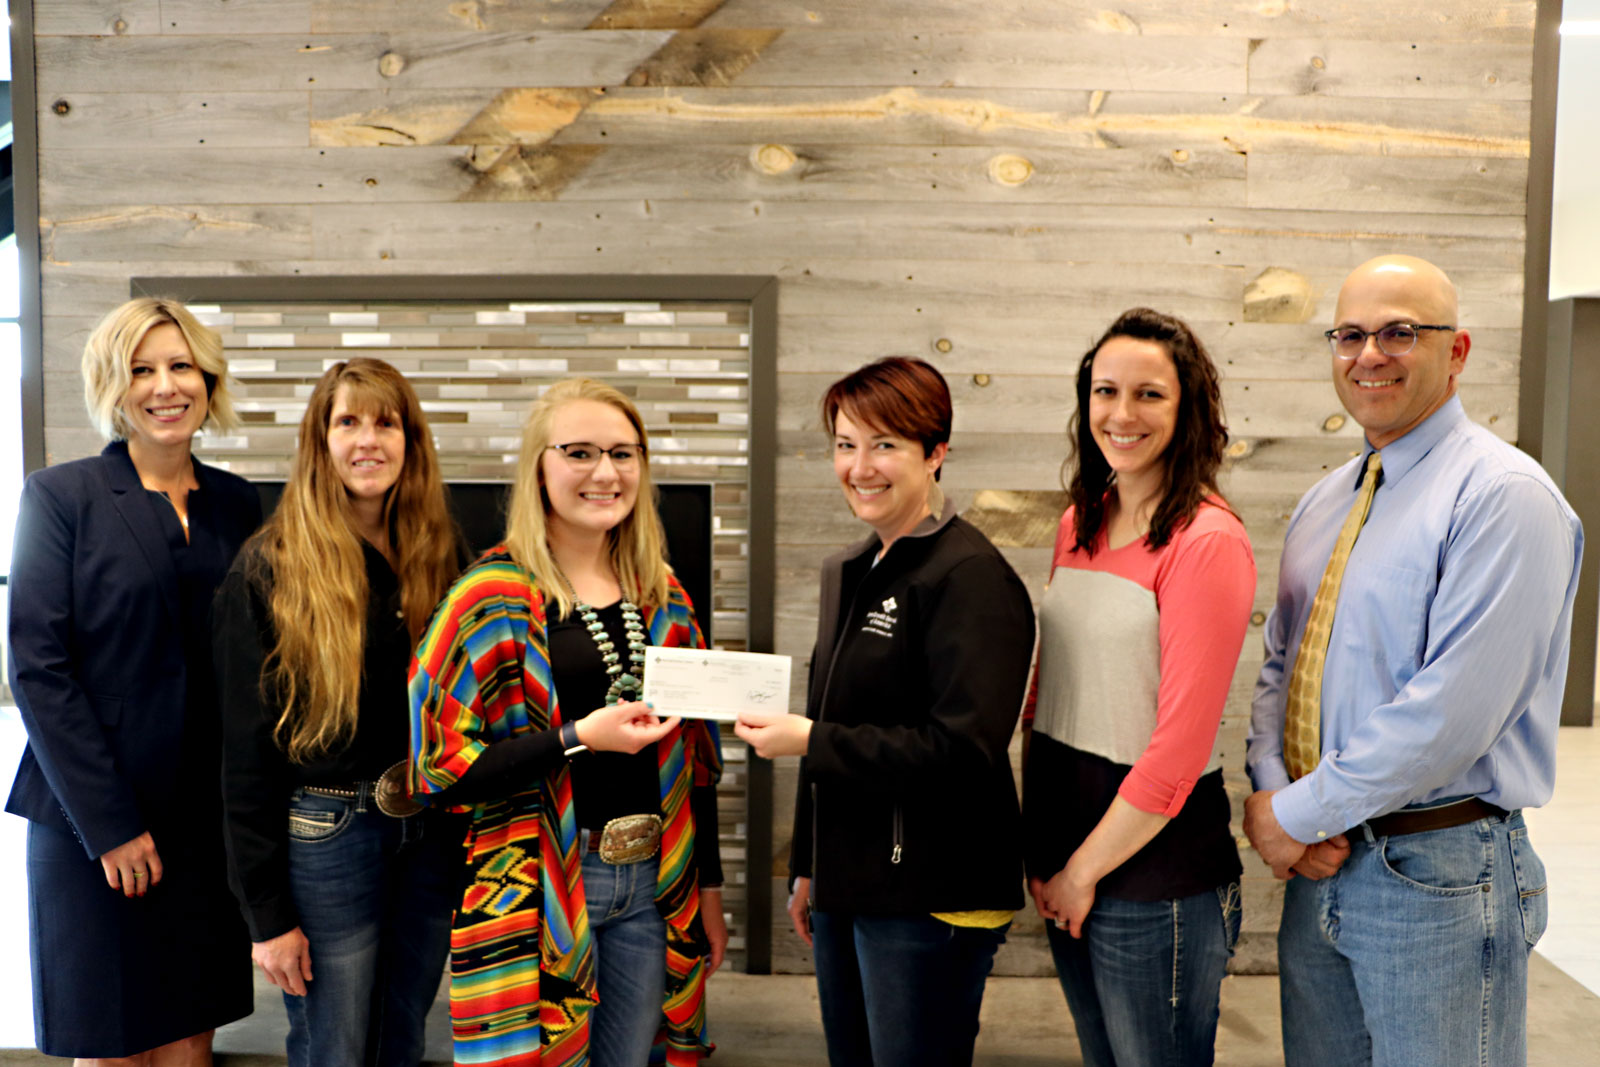 Left to right: Heidi Edmunds, V.P. for Academic Services, Dr. Georgia Younglove, Livestock Judging and Show Team coach, Myca Cantrell, Student, Kelly Downer, Farm Credit Services of America, Kaitlyn Steben, Agriculture Instructor, and Dr. Monte Stokes, Agriculture Department Head/Instructor. 